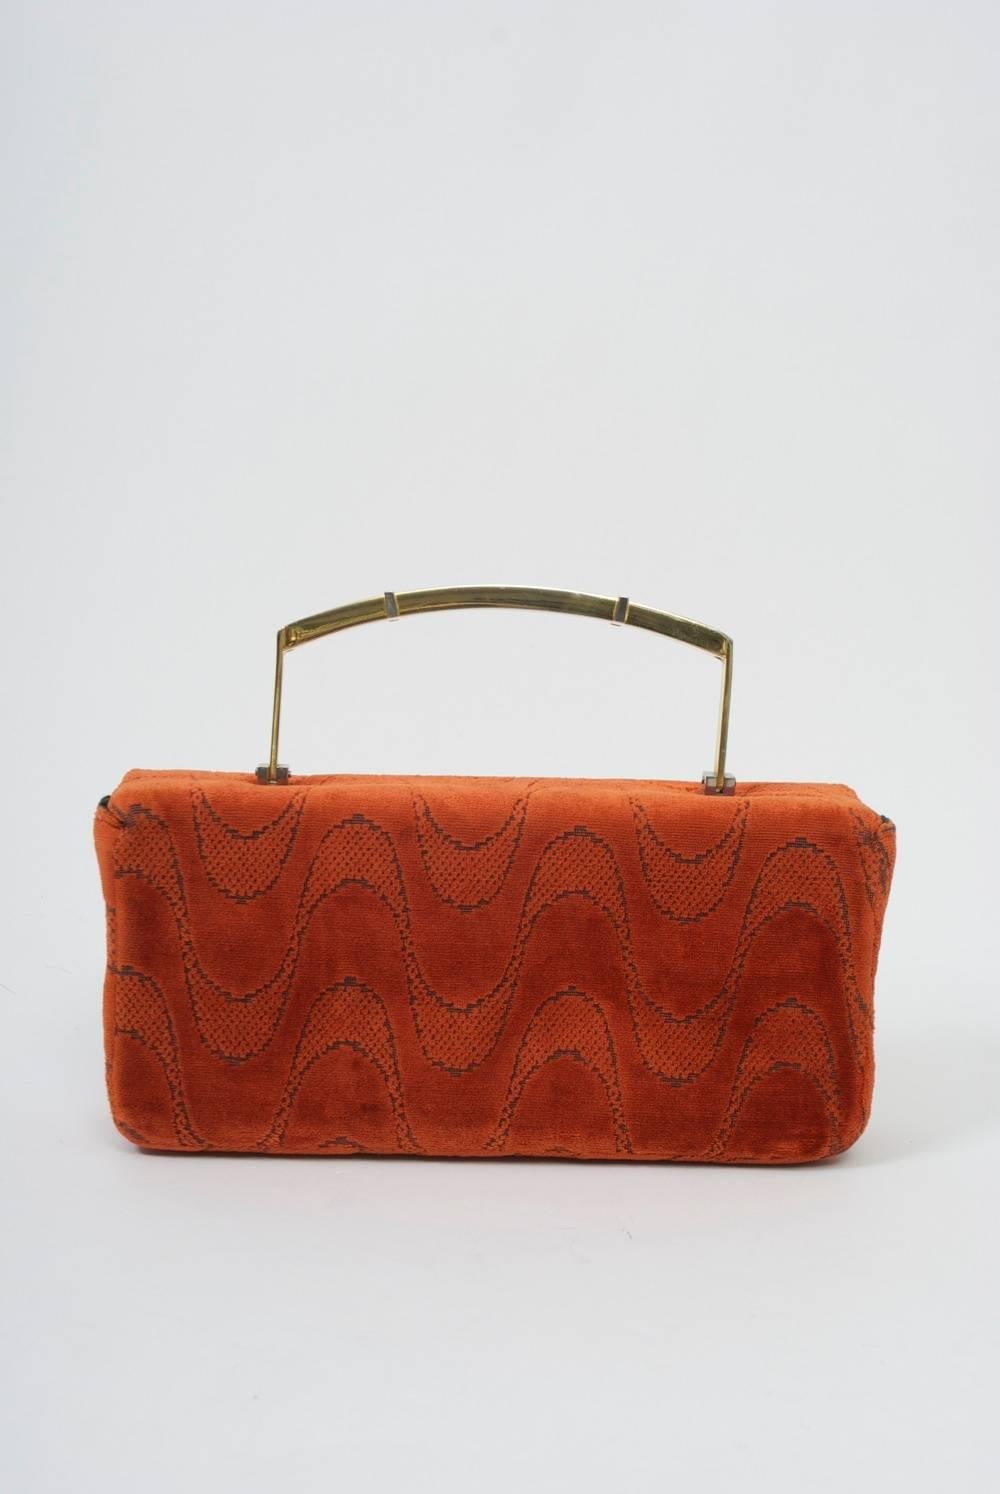 Unusual rectangular box bag in orange cut velvet with metal handle in gold accented in silver.The rectangular clasp pulls down to open the bag. Black faille interior with side compartments.